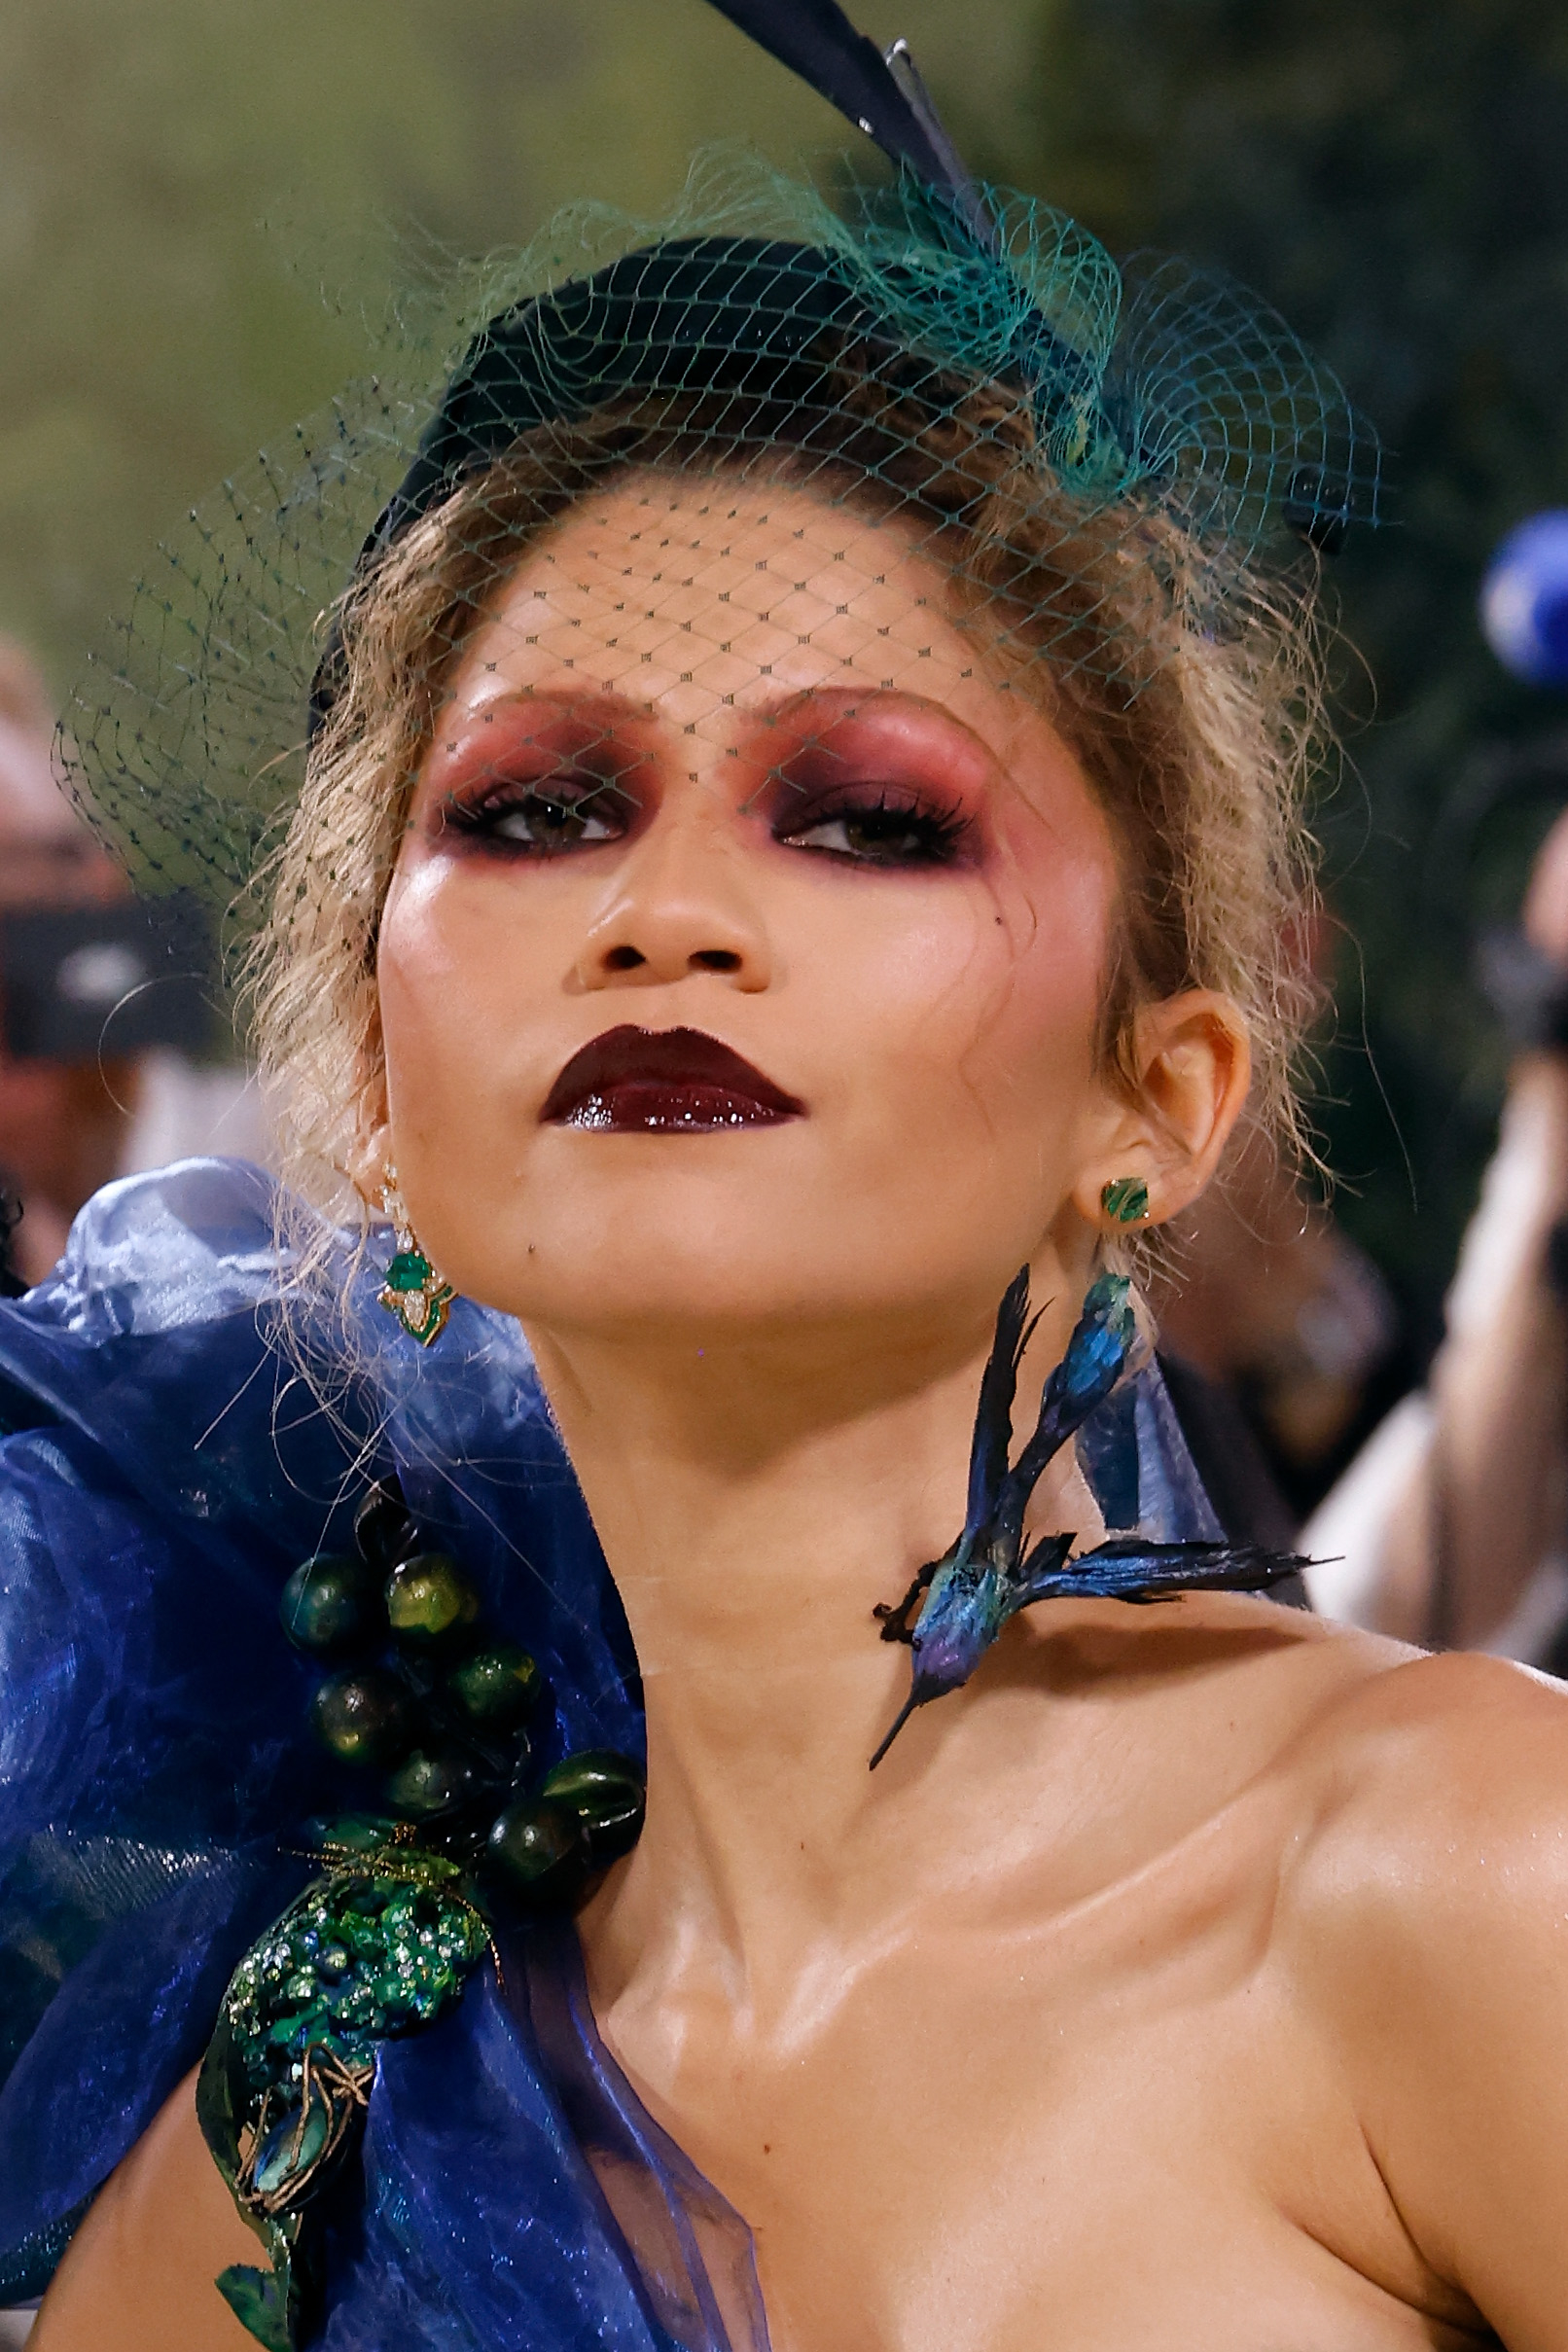 Zendaya with avant-garde makeup and embellished headpiece at a themed event